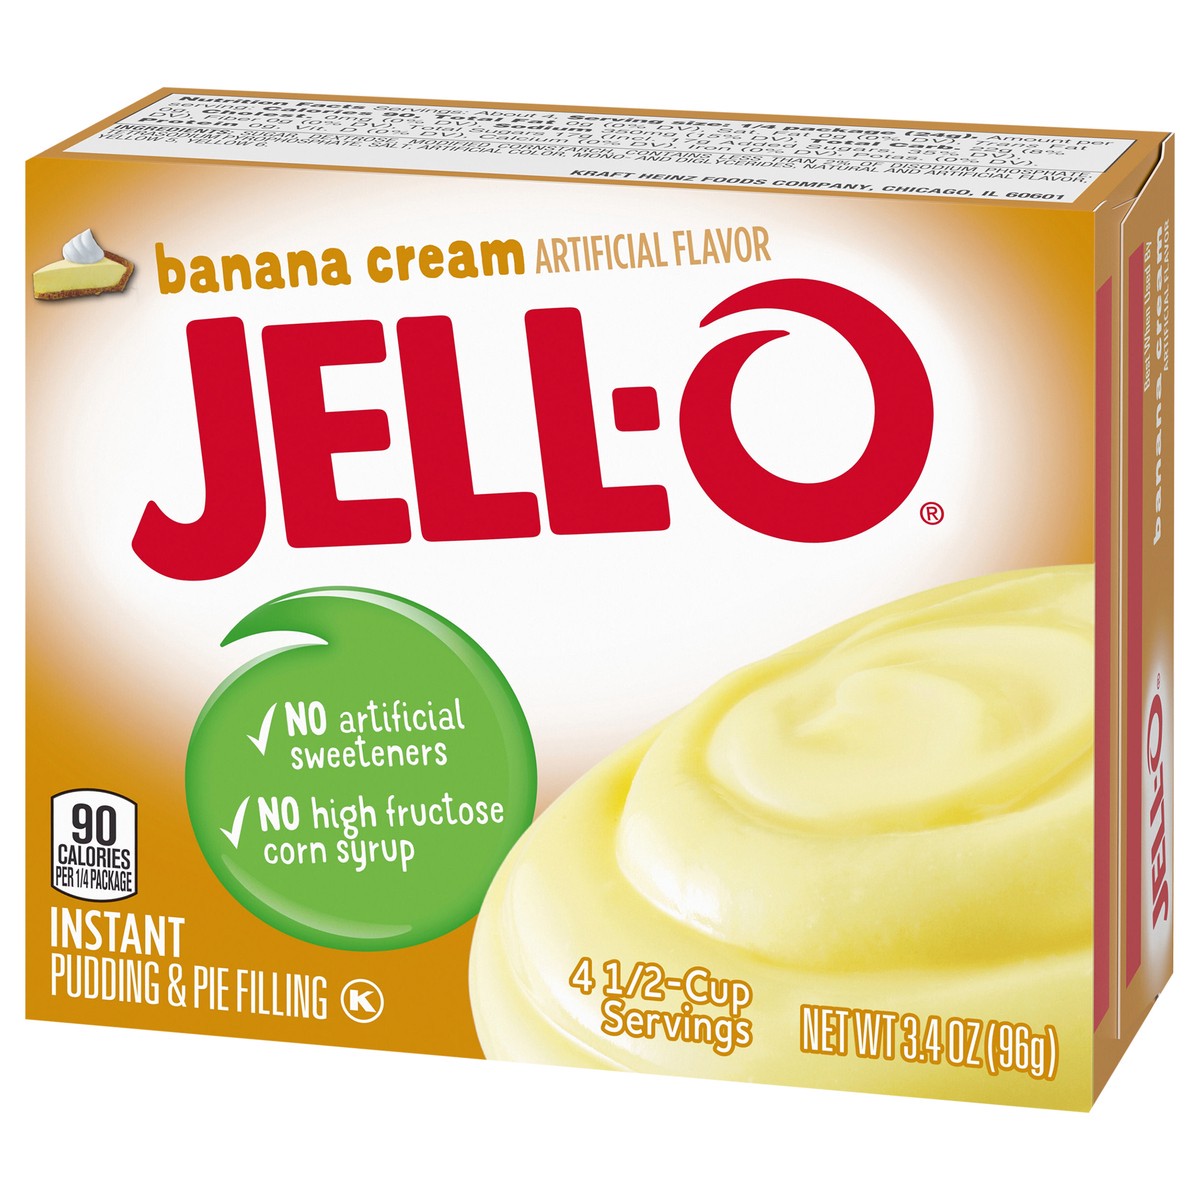 slide 7 of 9, Jell-O Banana Cream Artificially Flavored Instant Pudding & Pie Filling Mix, 3.4 oz. Box, 3.4 oz